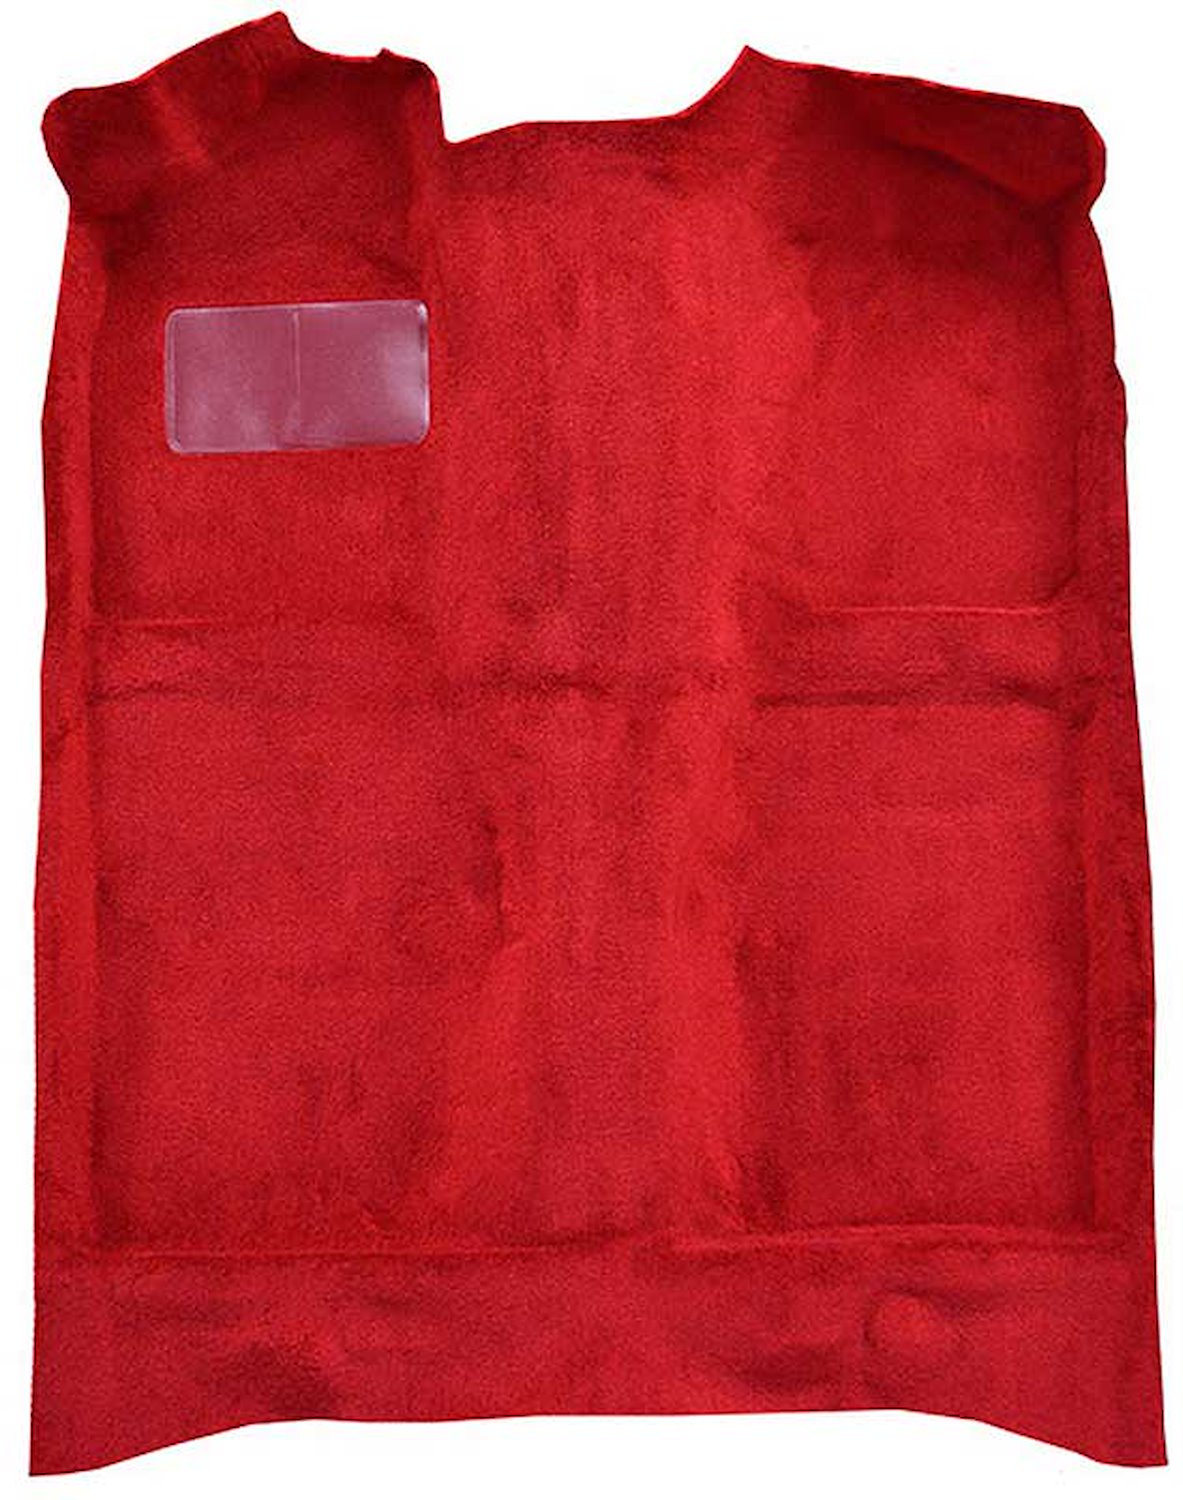 A4020B02 Passenger Area Cut Pile Molded Floor Carpet With Mass Backing 1979-81 Mustang; Red